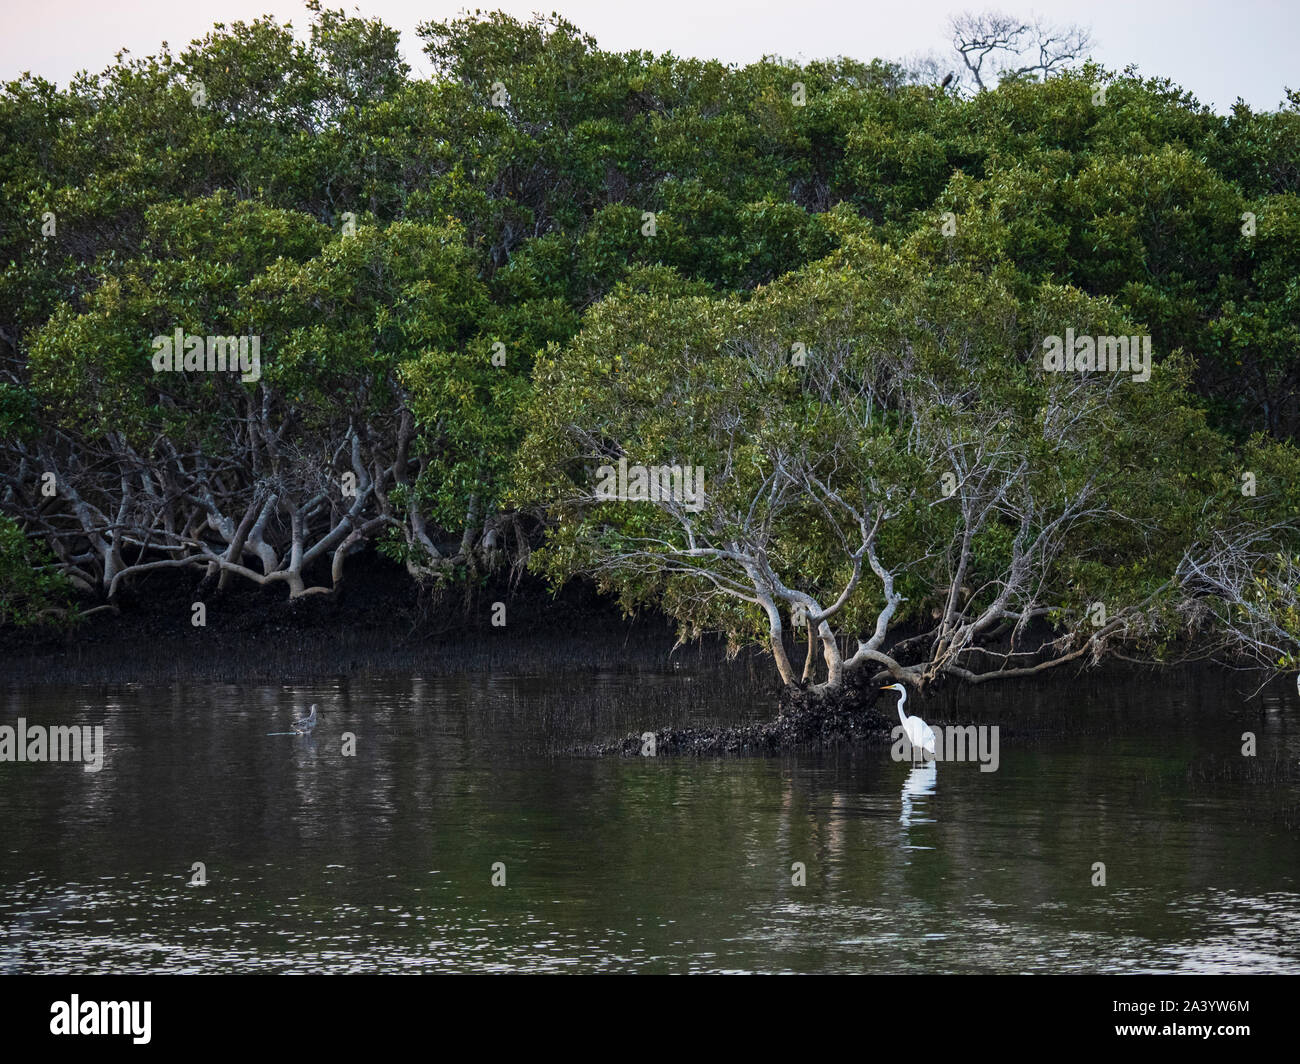 Egret standing in river by trees Stock Photo